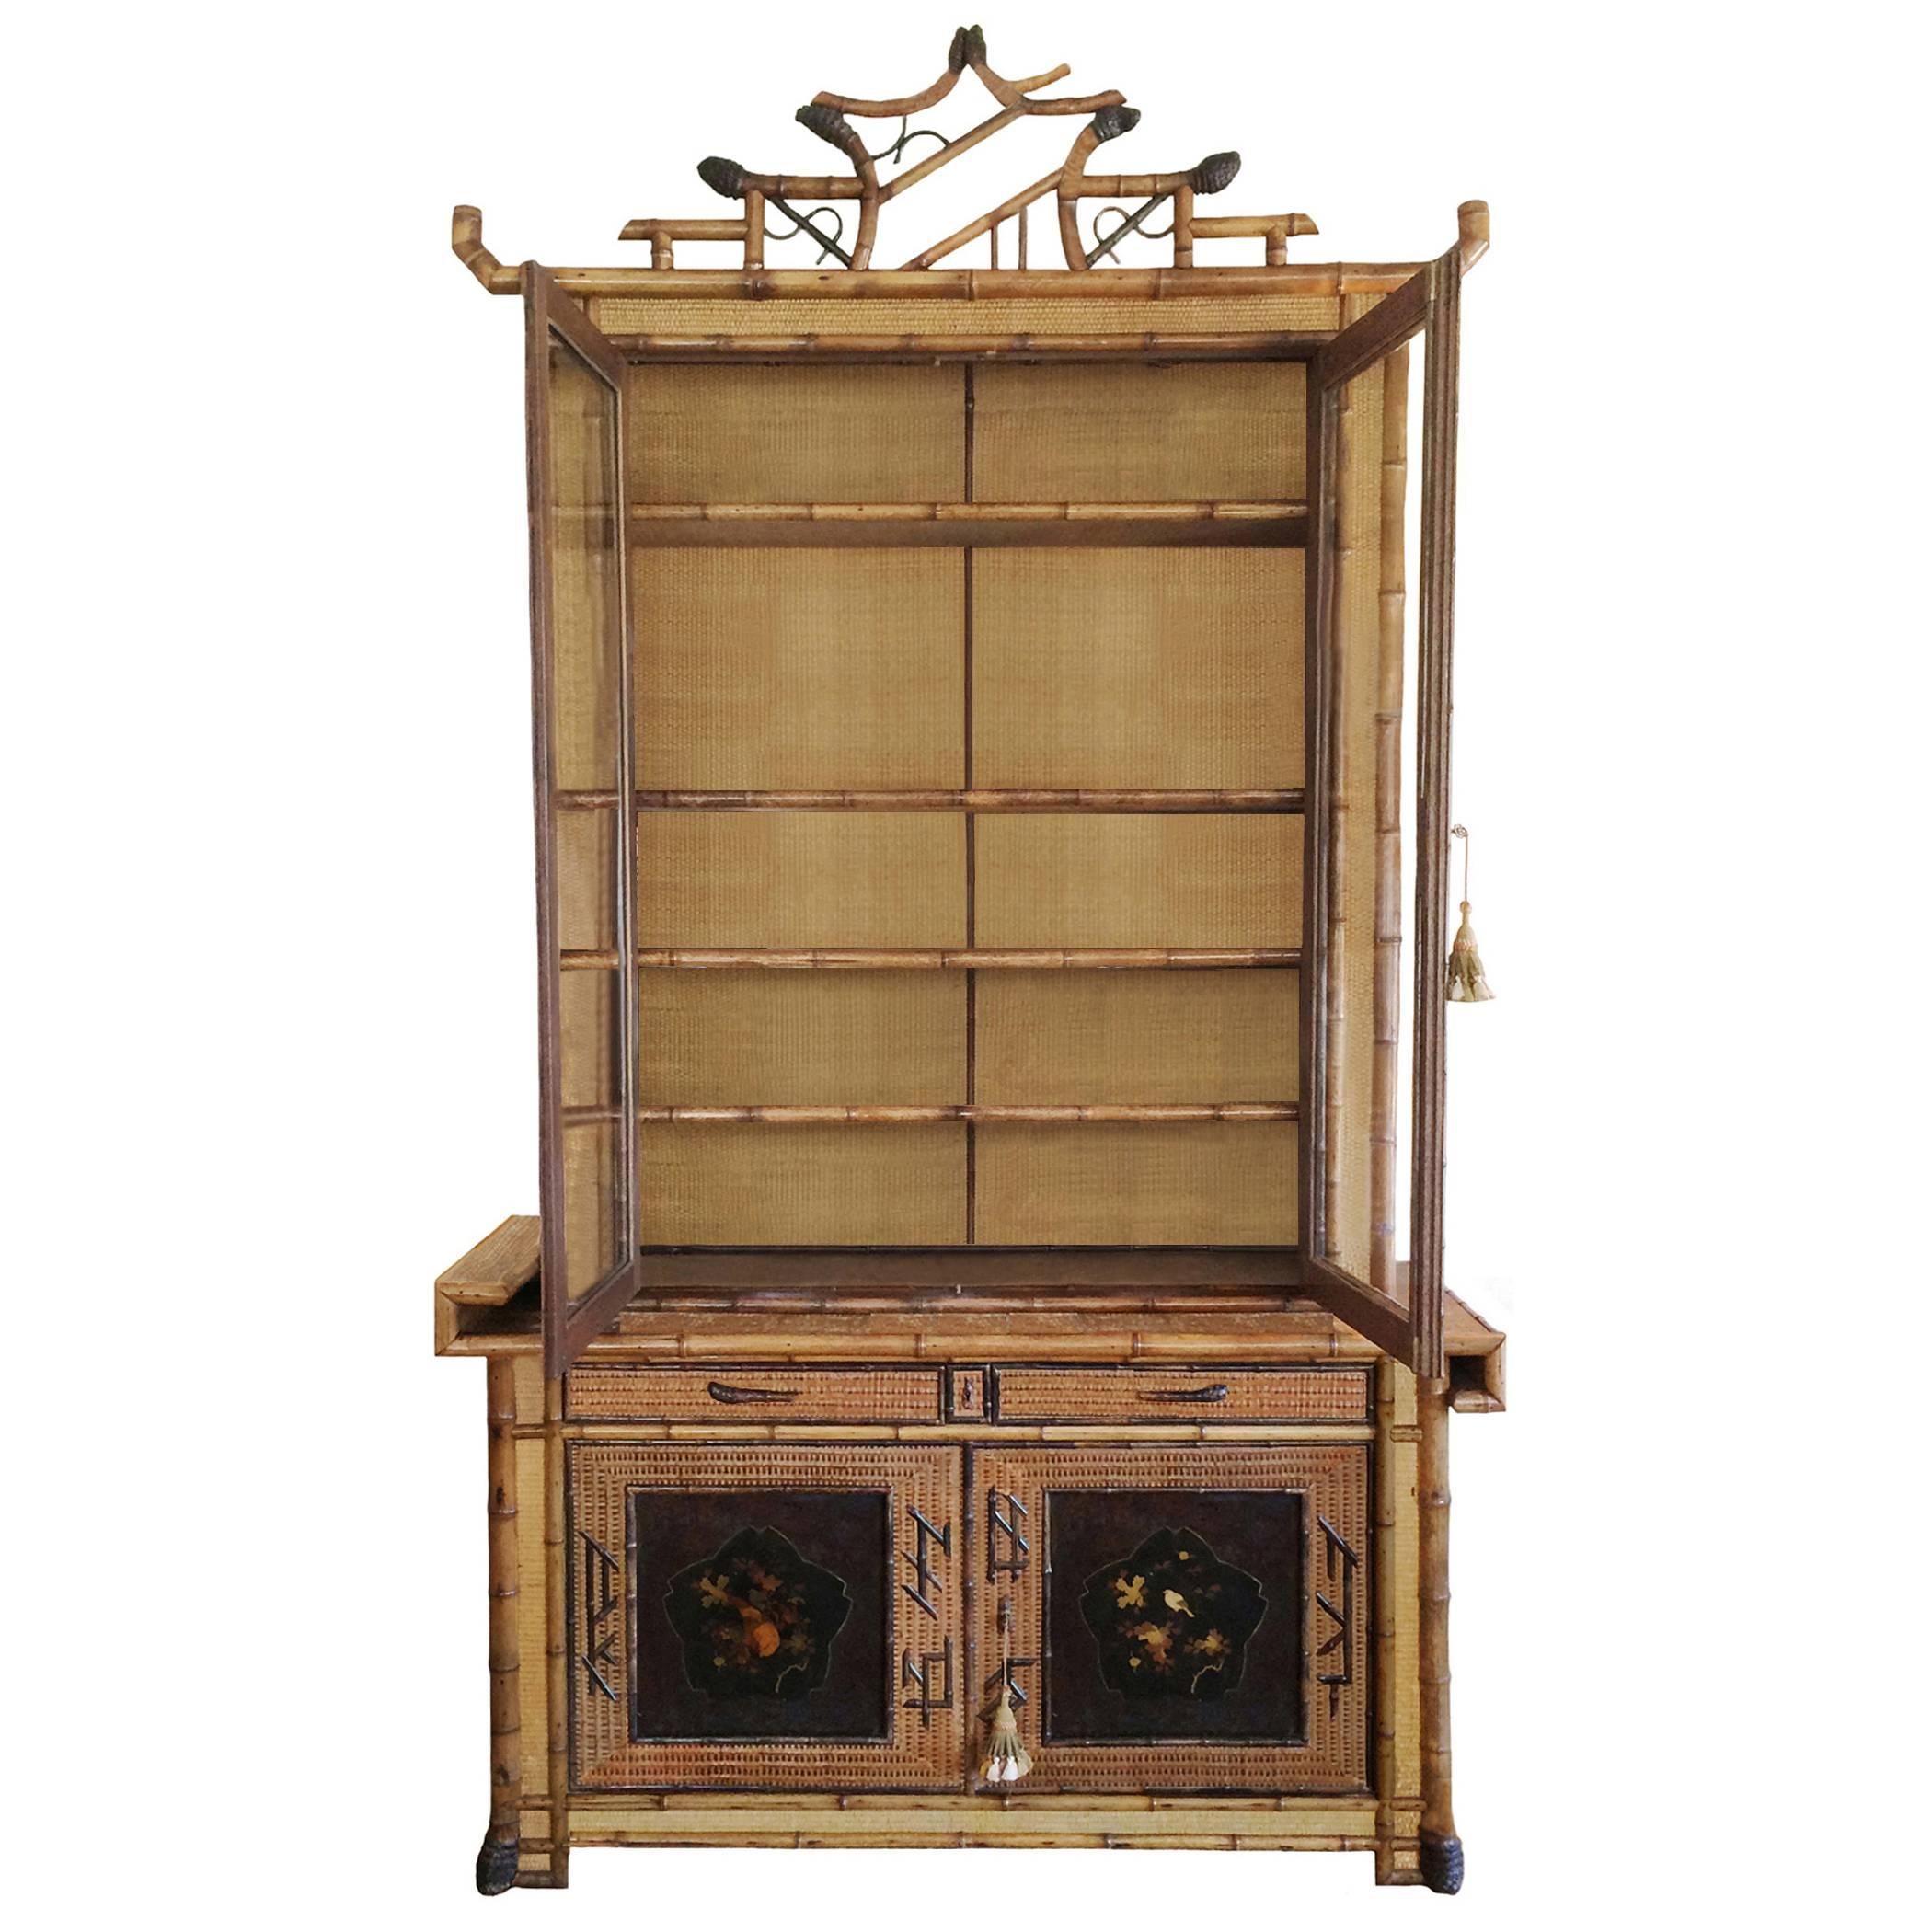 Unique French fantasy Japonais bamboo cabinet by Perret et Vibert. Woven straw, rattan, bamboo applique, japanned lacquer panels; intricate fretwork, make this two-piece cabinet unique and very rare, circa 1880.


 